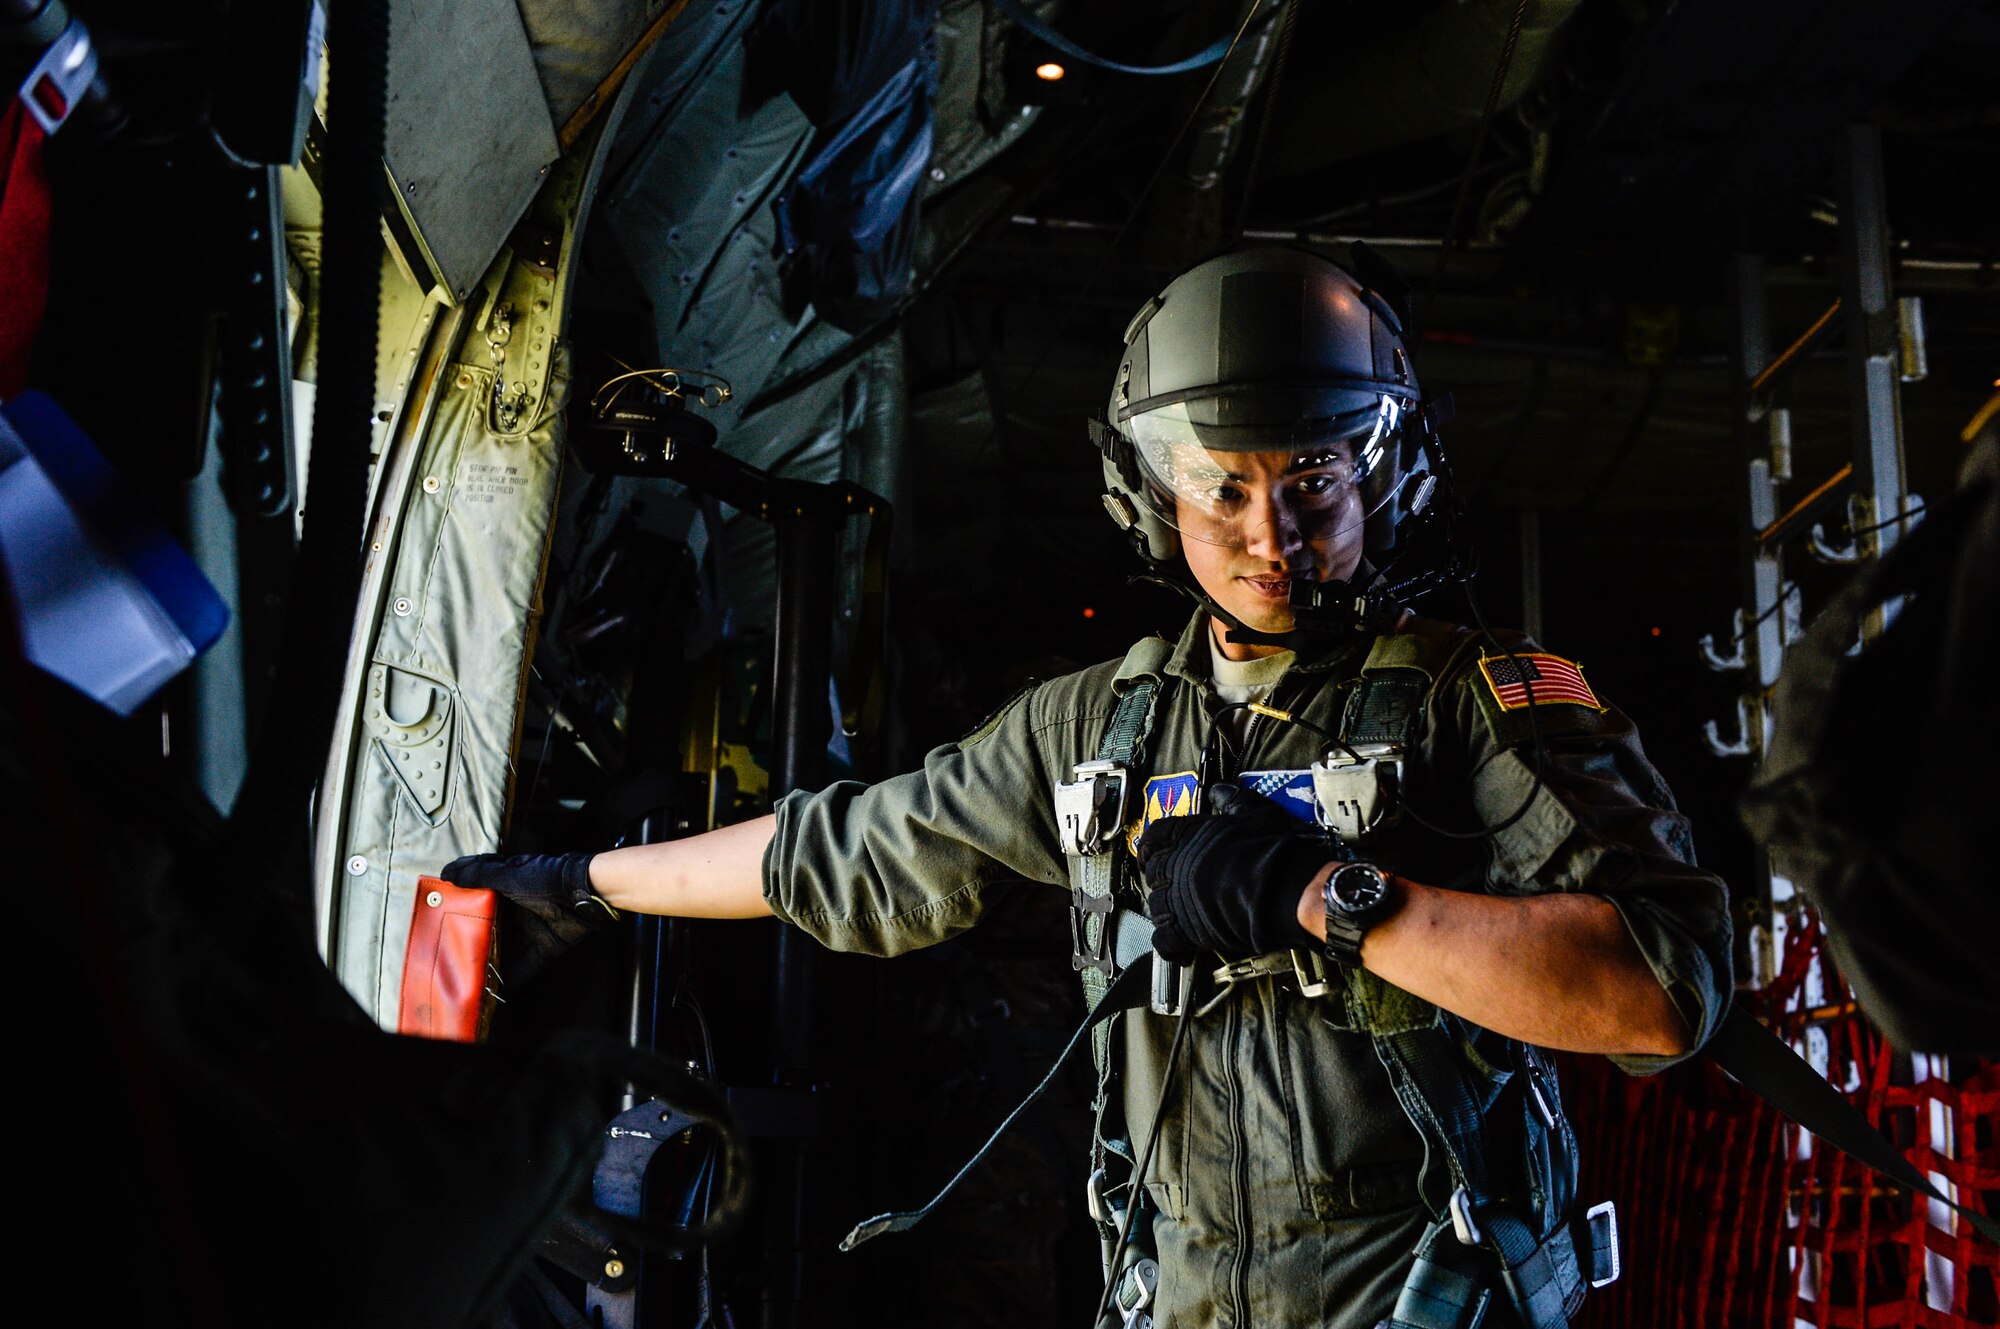 U.S. Air Force Airman 1st Class Alexander J Loberg, 37th Airlift Squadron C-130J Super Hercules loadmaster, stands by the side door of his aircraft as he assists with airdrop operations over Poland, Aug. 7, 2018. U.S. aircrews and aircraft airdropped Polish paratroopers as part of Aviation Rotation 18-4, a bilateral exercise between the U.S. and Polish armed forces. (U.S. Air Force photo by Senior Airman Joshua Magbanua)